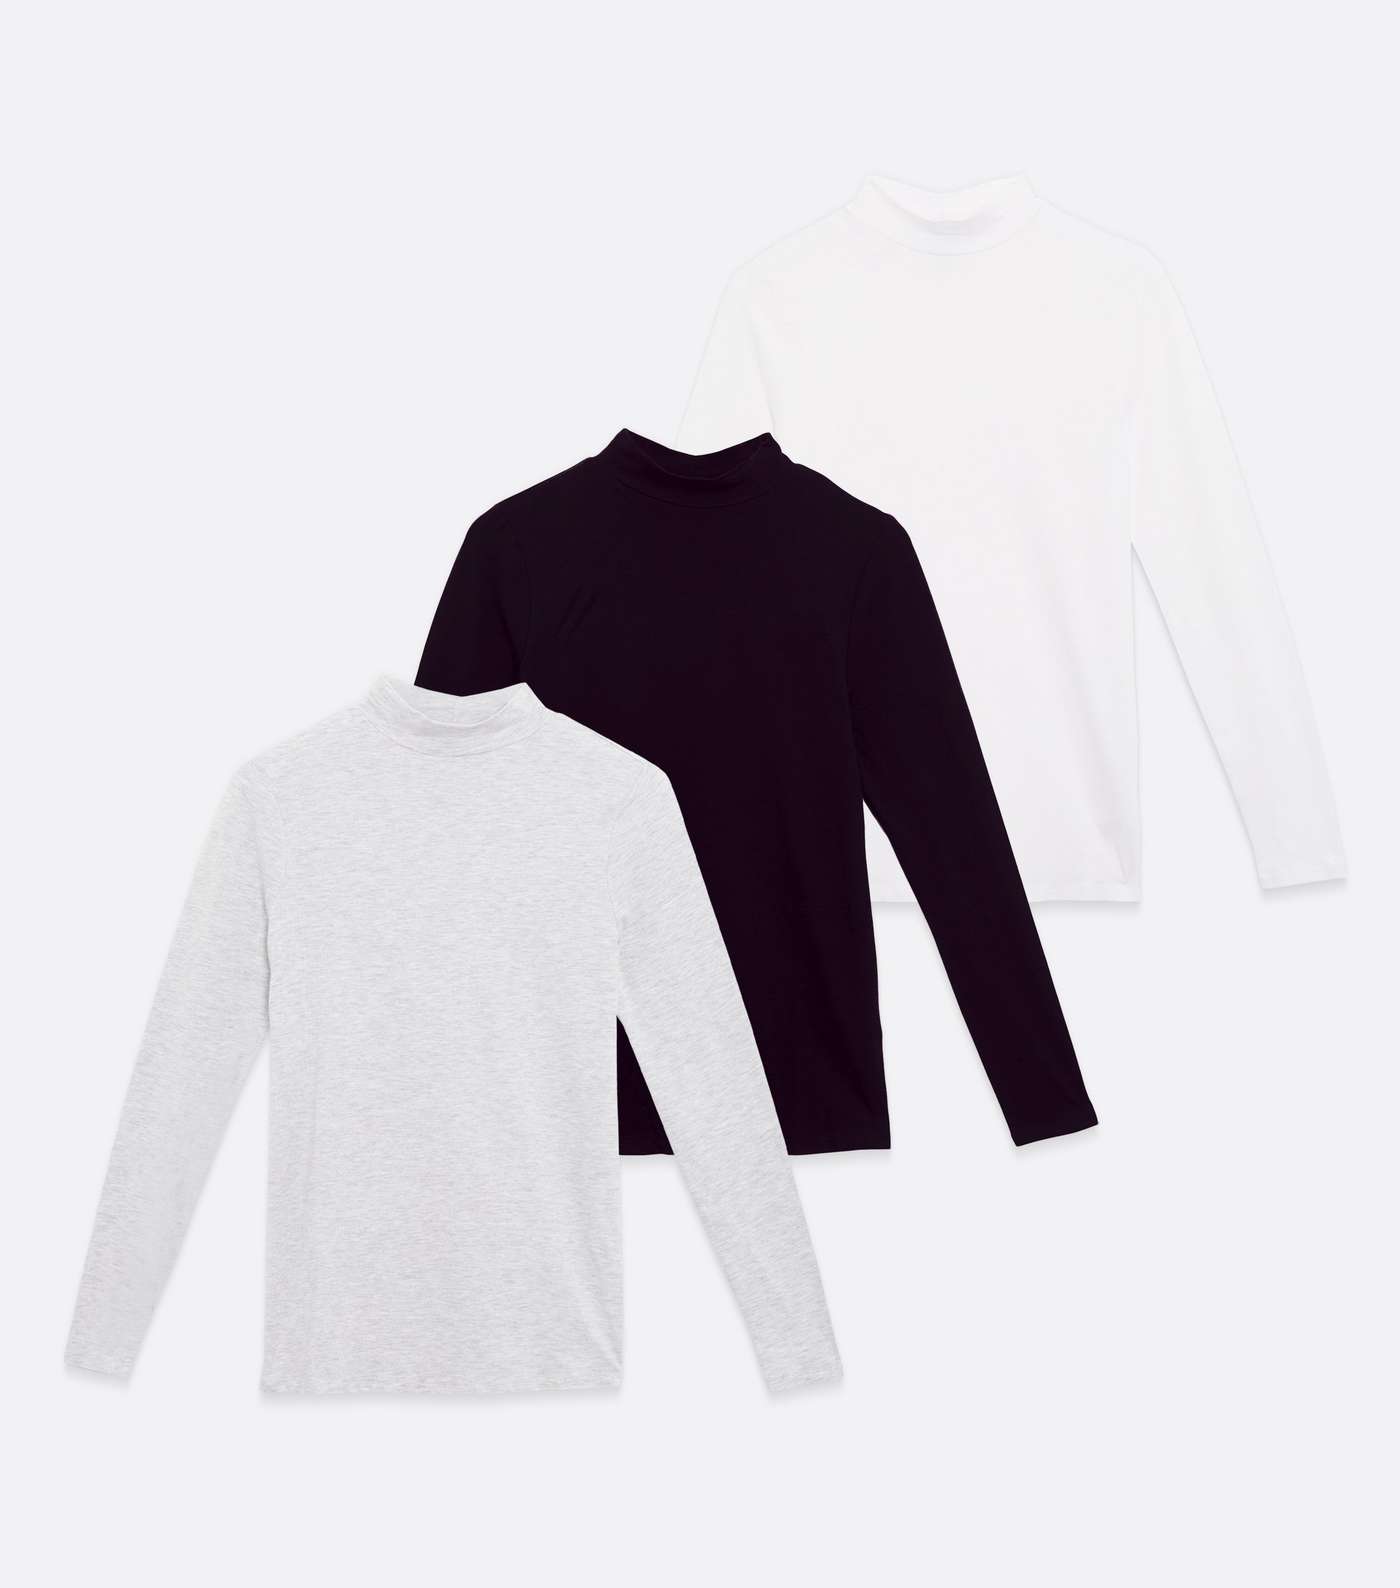 Maternity 3 Pack Black White and Grey High Neck Tops Image 5